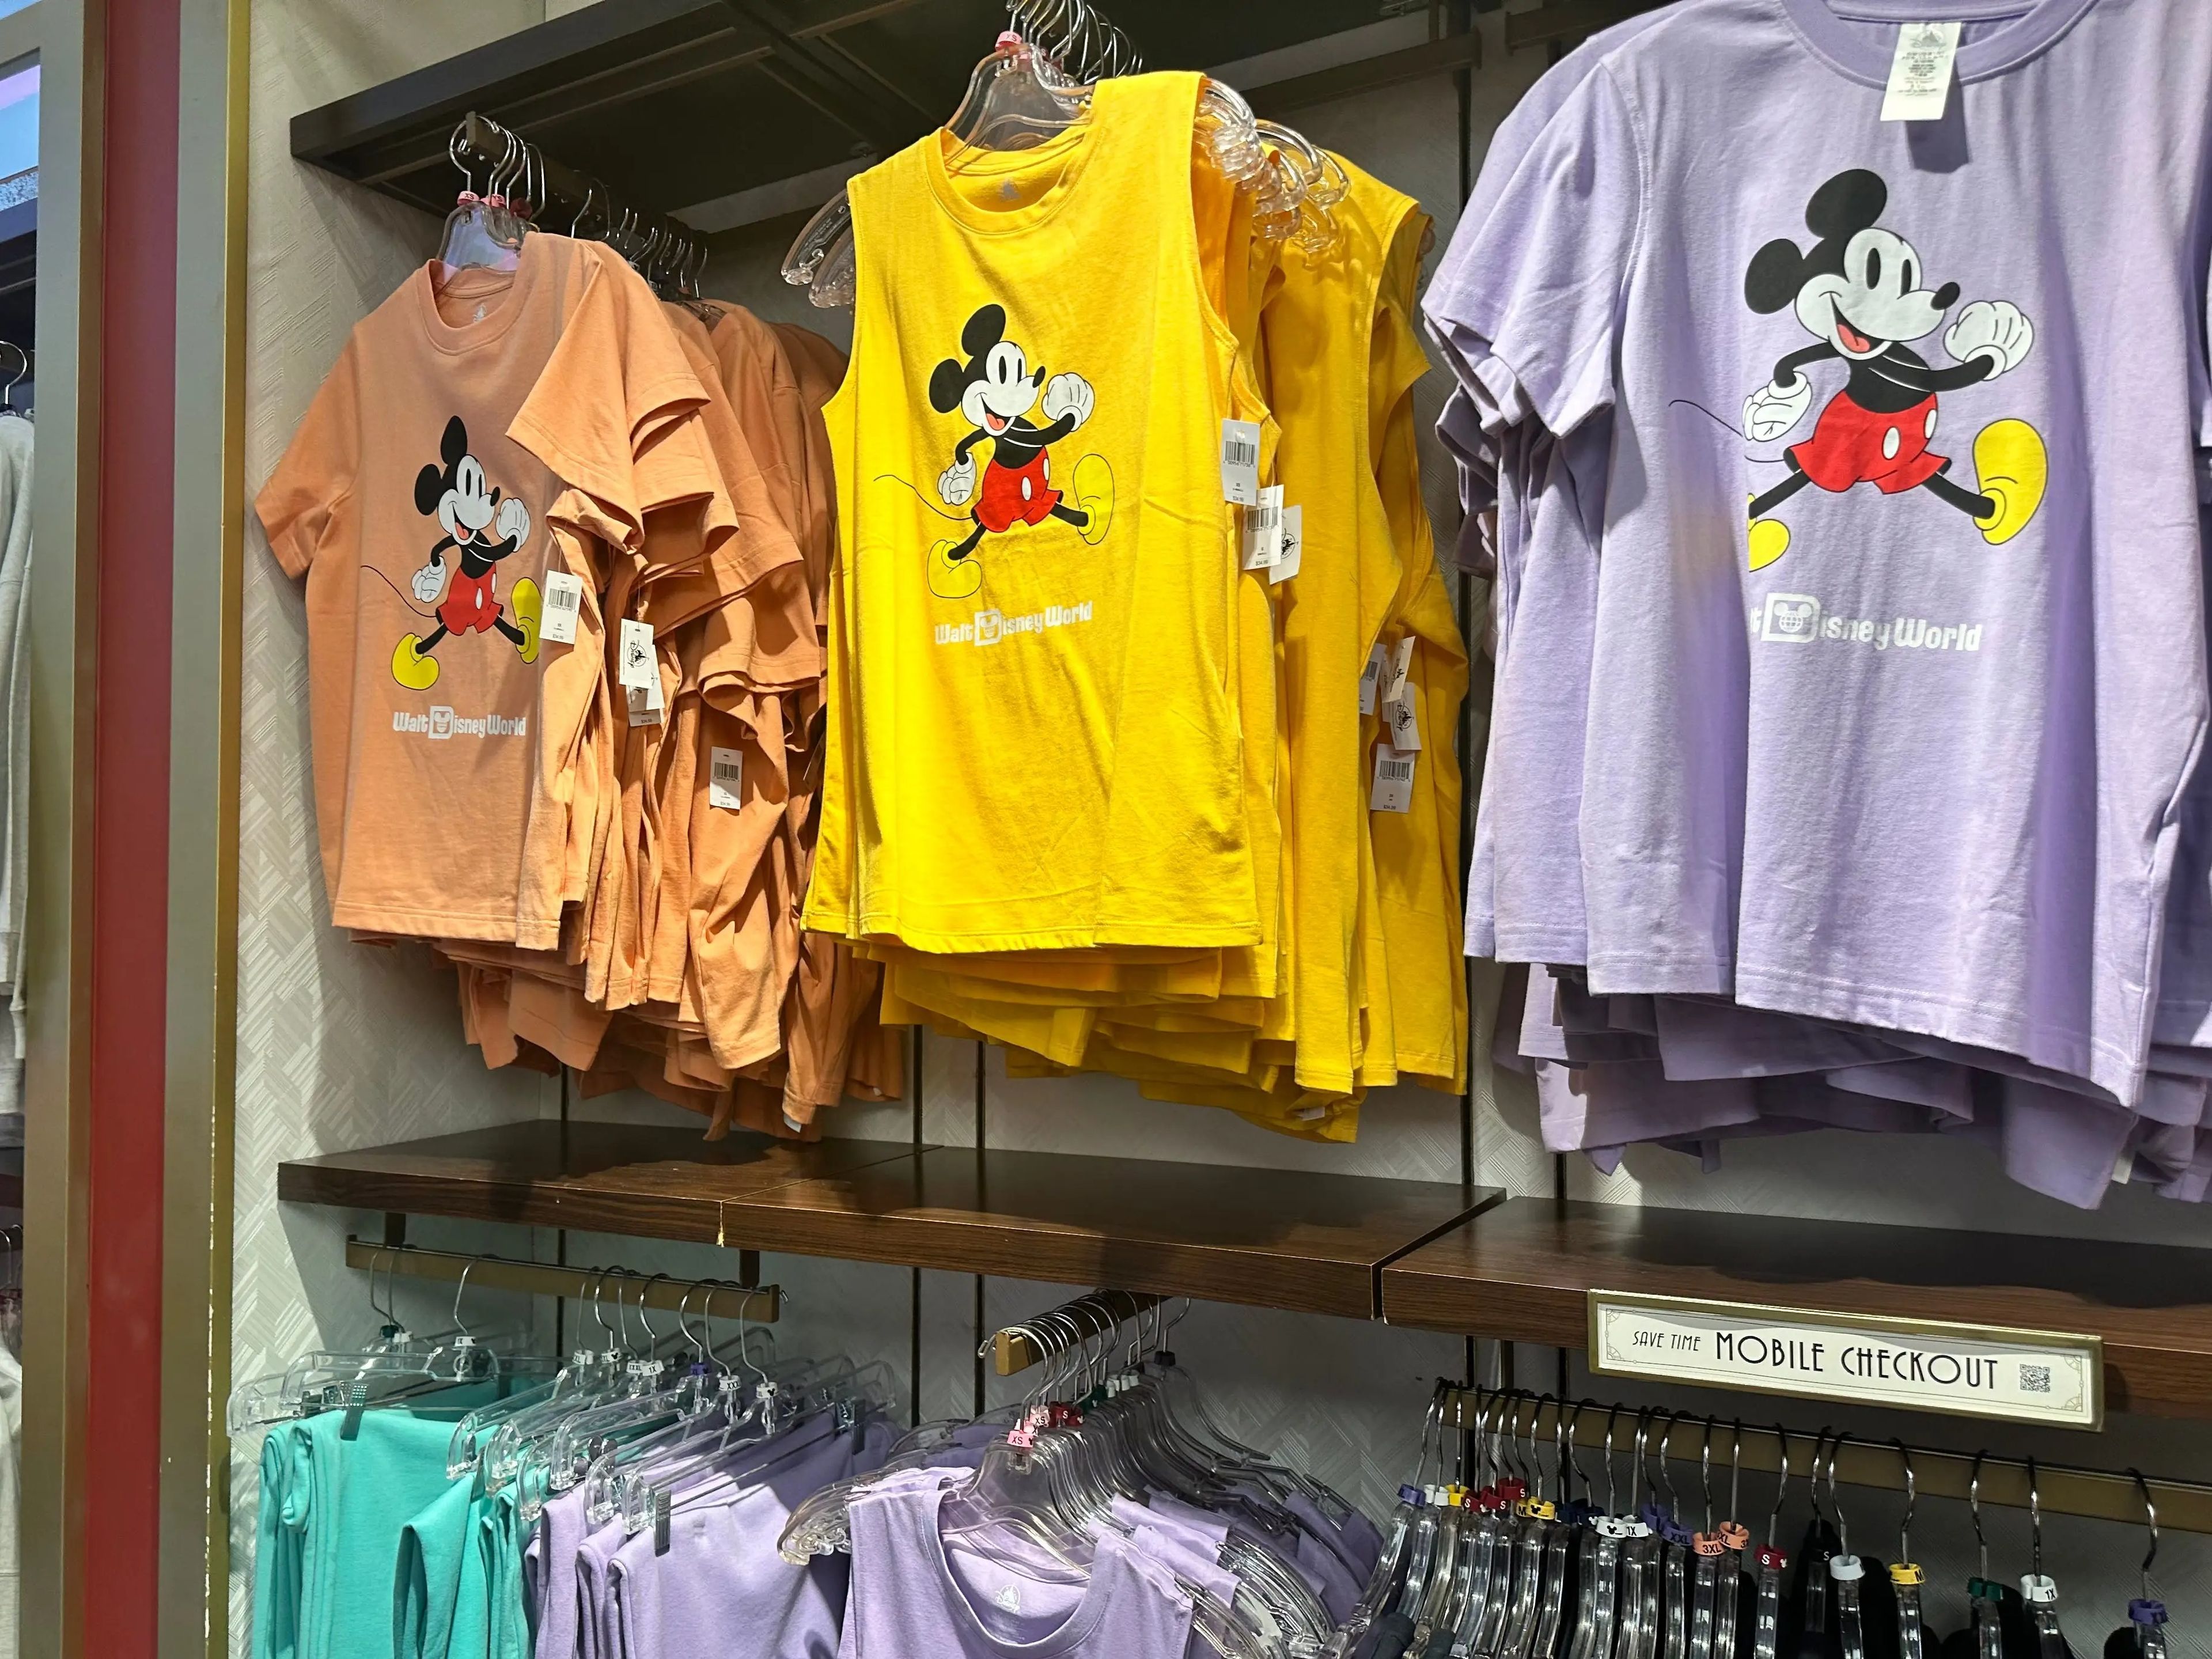 Mickey Mouse merchandise at Disney World.